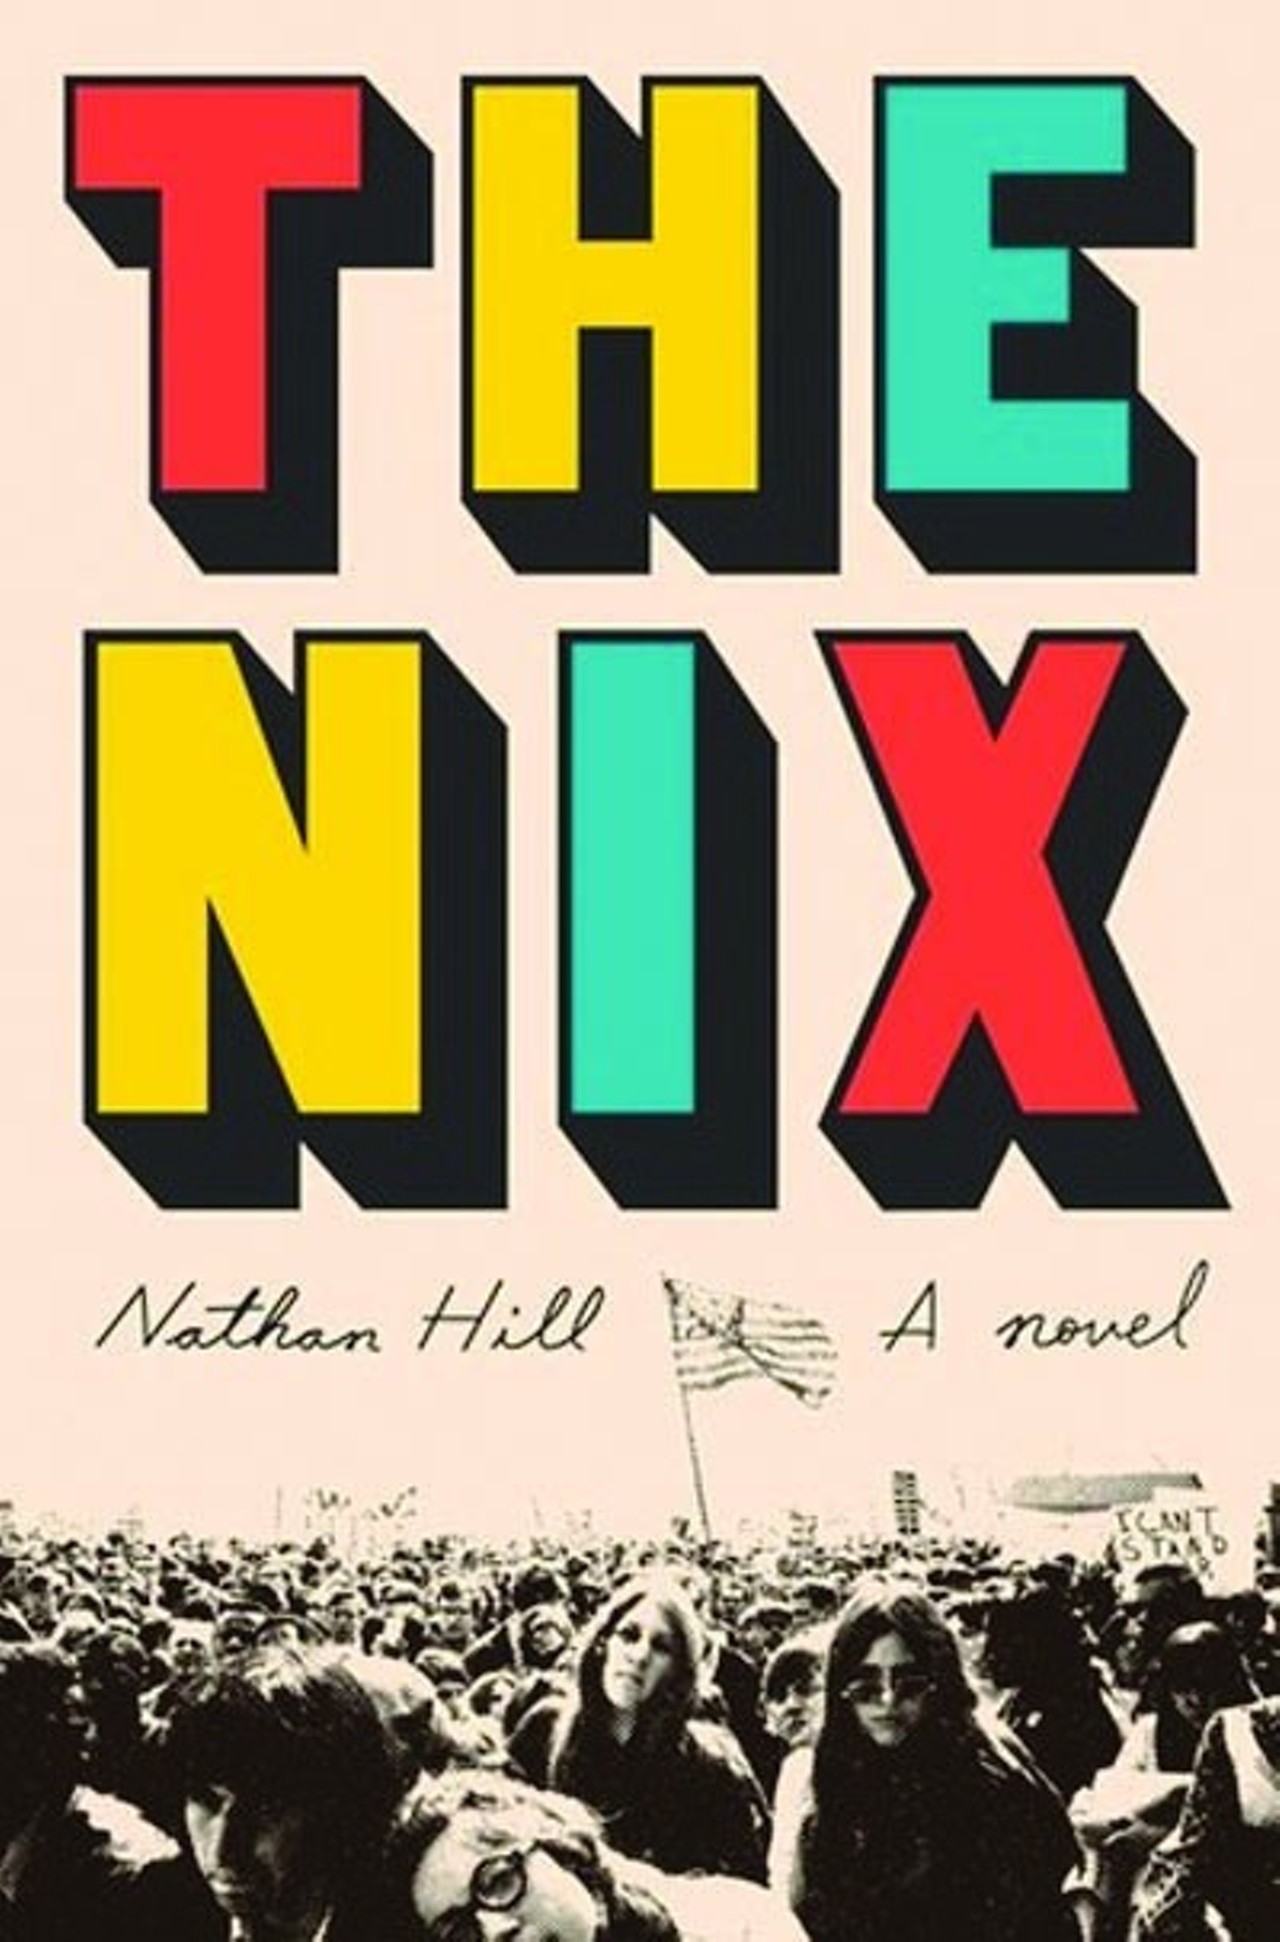 The Nix by Nathan Hill -
In yet another debut novel on this list, Hill explores our divided political landscape through the story of an English professor who has to deal with the fallout of his estranged mother throwing a rock at a divisive and discriminating political candidate. With sharp prose, a keen knack for detail and humorous observation, Hill has written a novel that feels at home with and indispensable for the reality-show nature of our current political times.